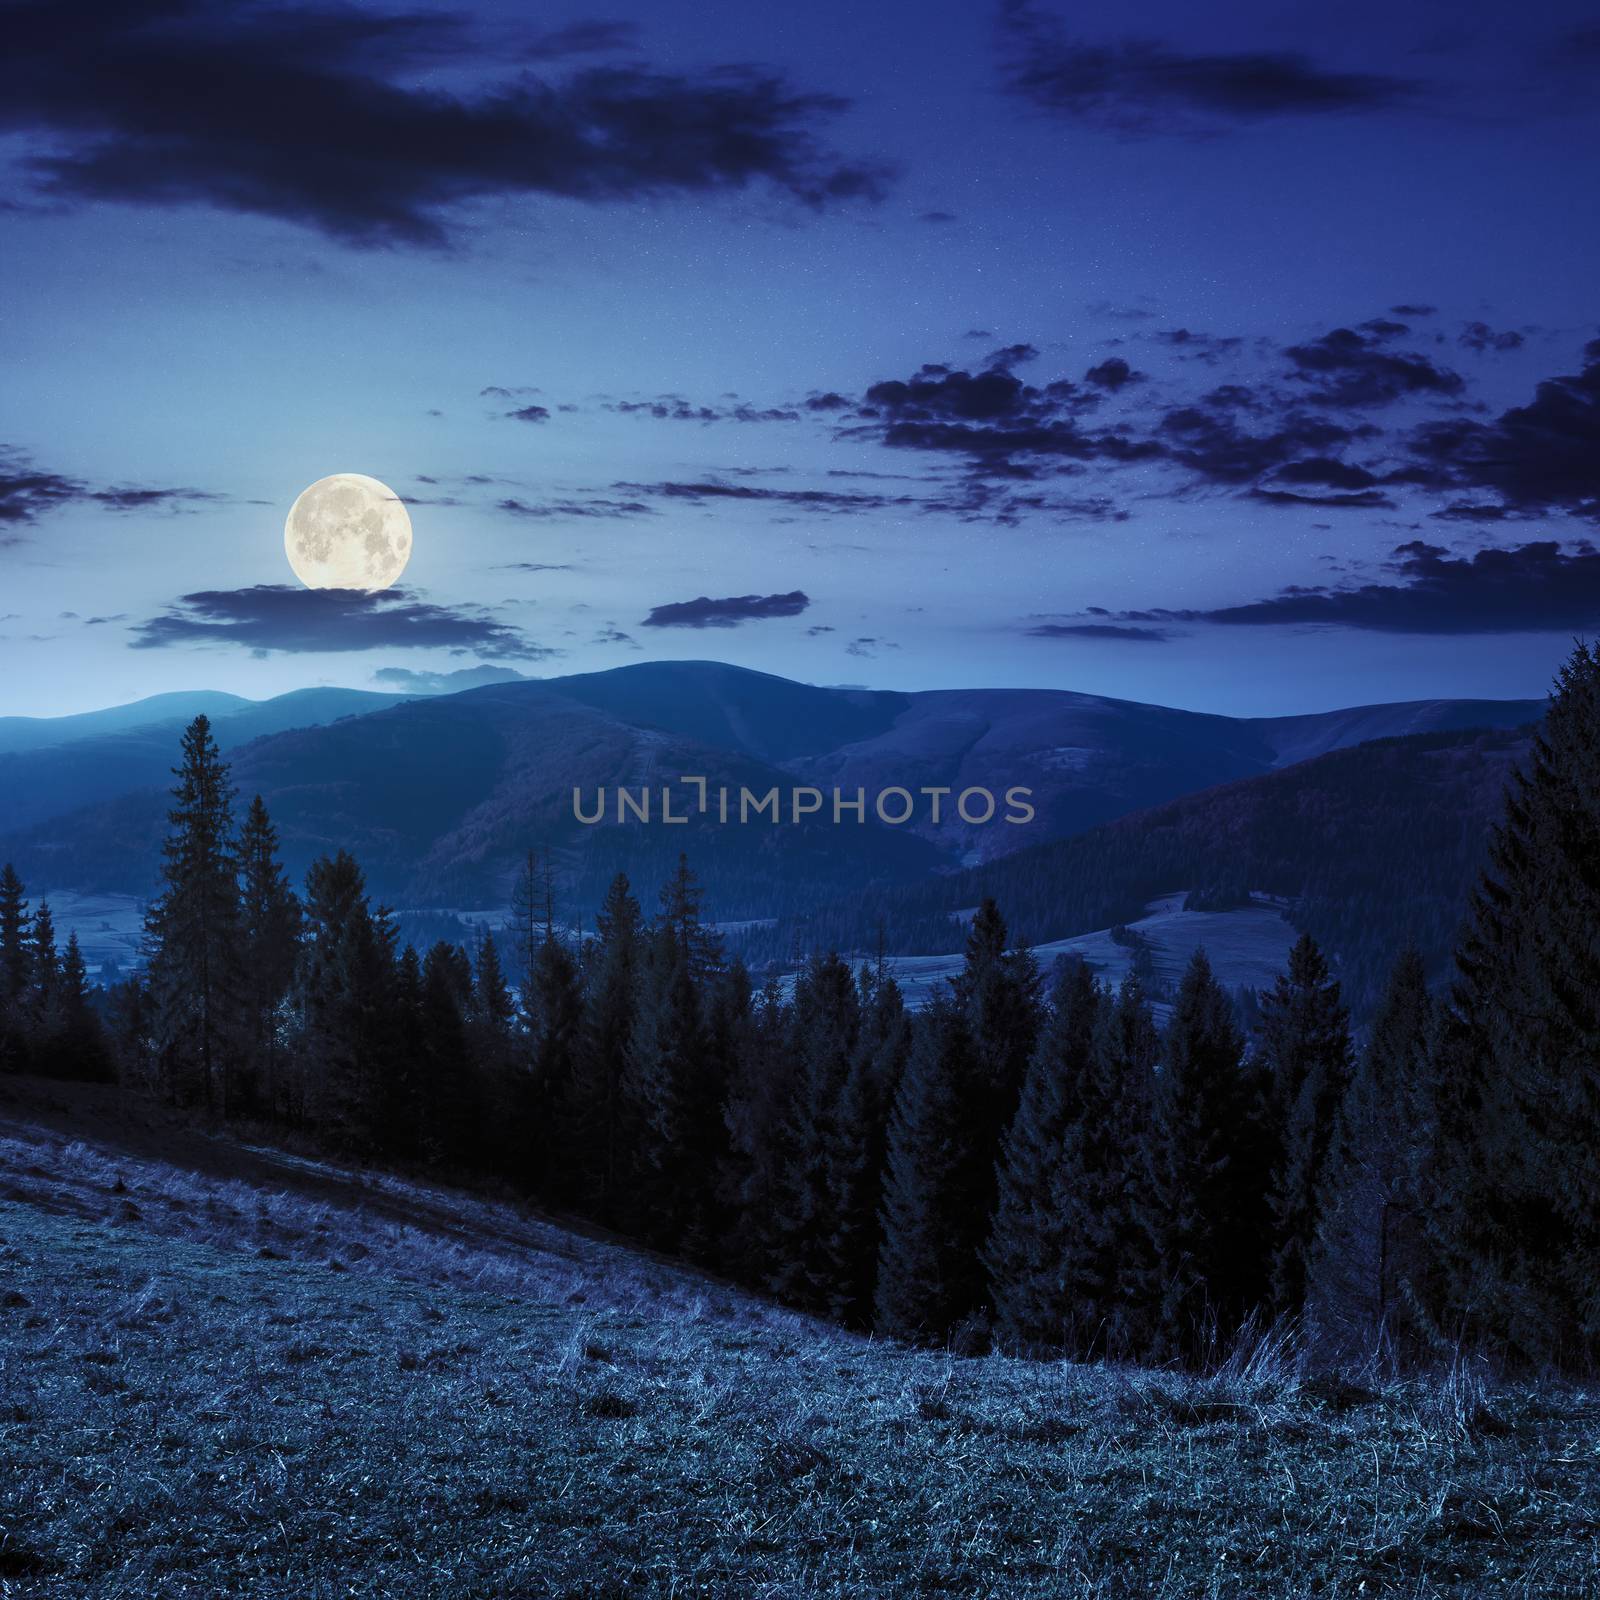 hillside of mountain range with coniferous forest and meadow at night in full moon light